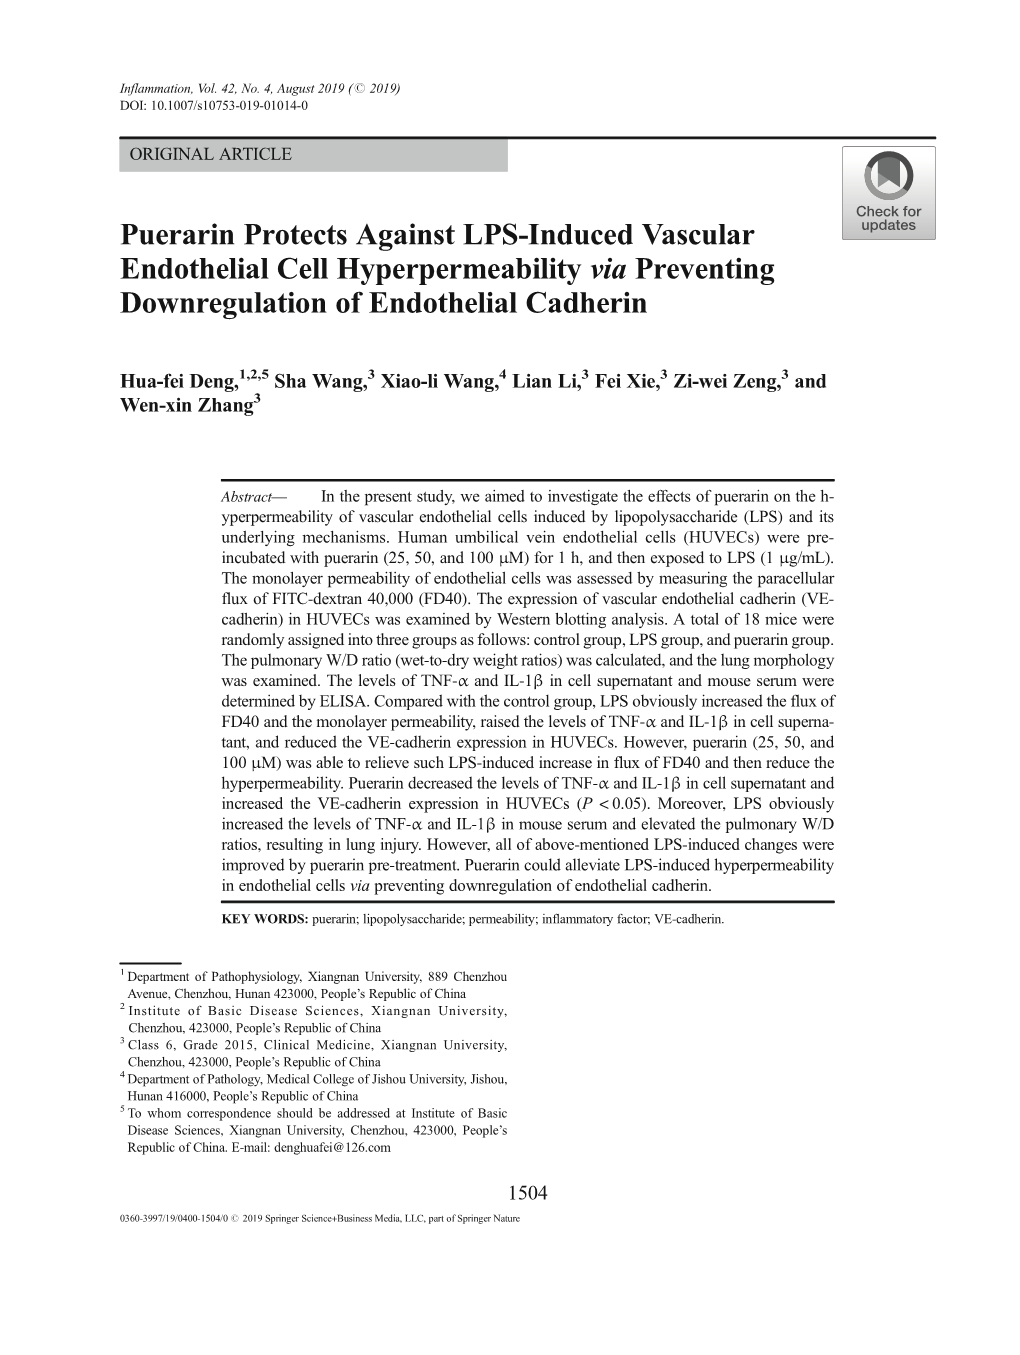 Puerarin Protects Against LPS-Induced Vascular Endothelial Cell Hyperpermeability Via Preventing Downregulation of Endothelial Cadherin